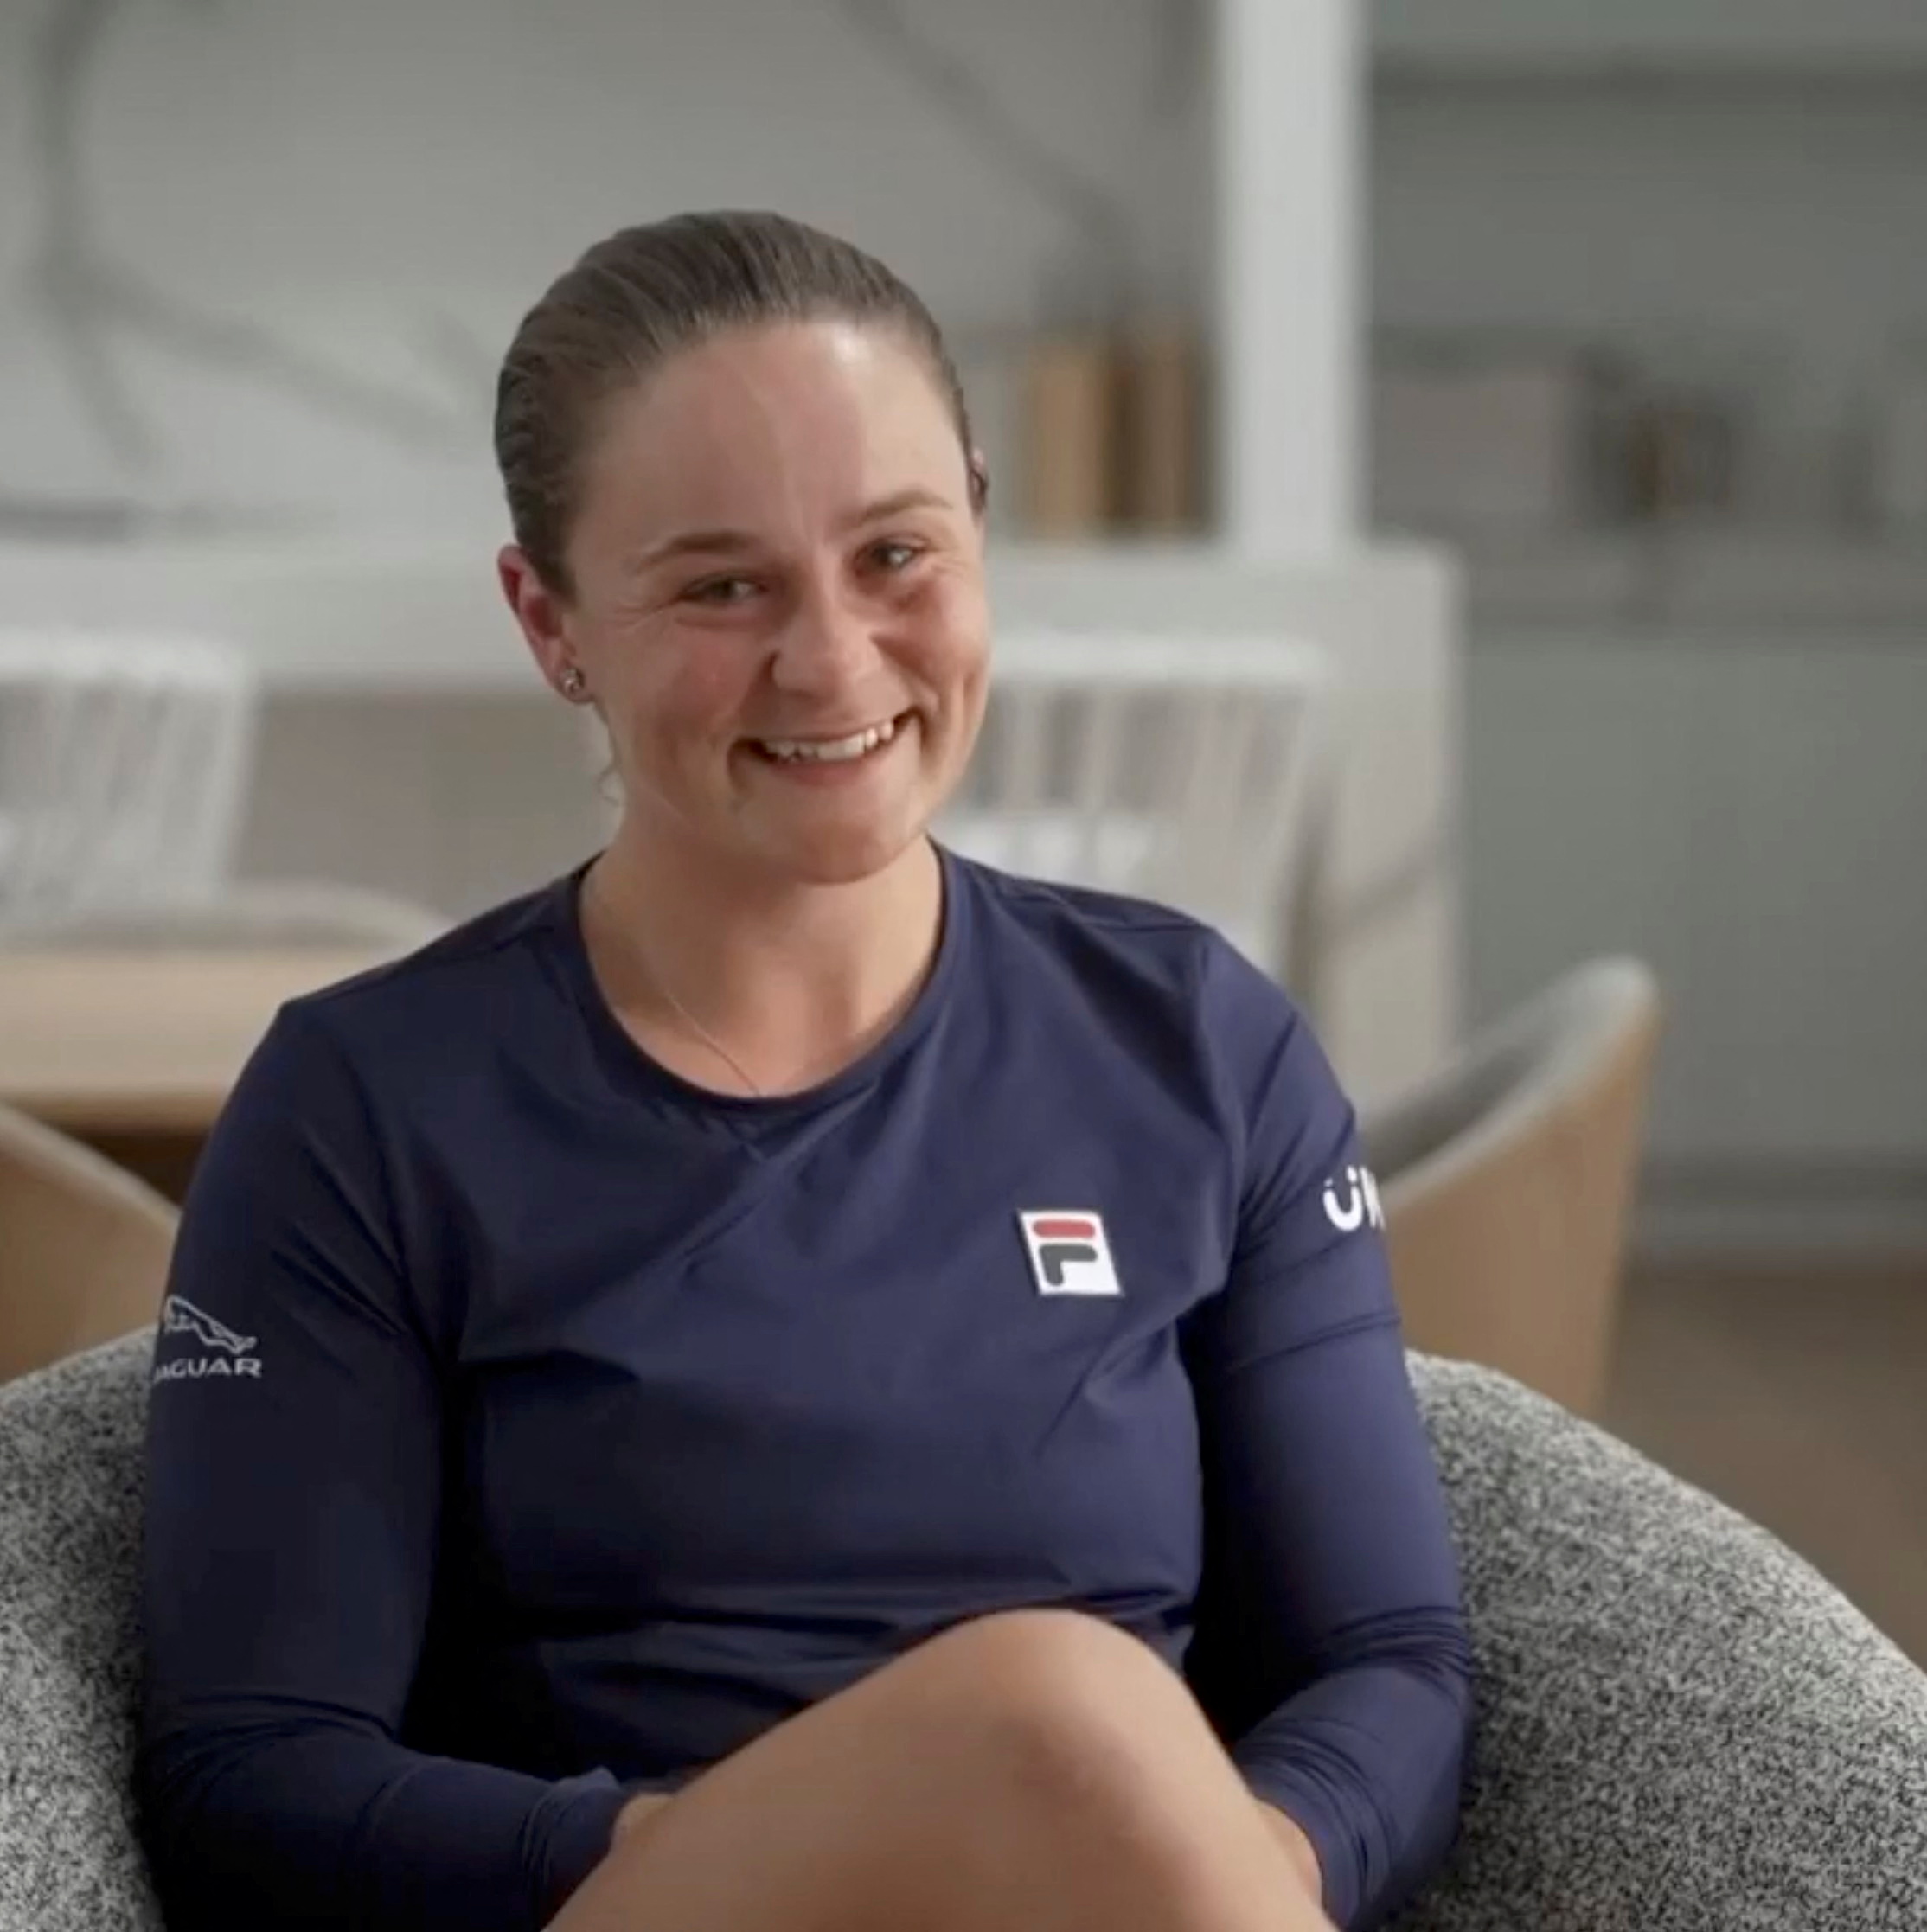 Australia's world number one Ashleigh Barty announces her retirement in Brisbane